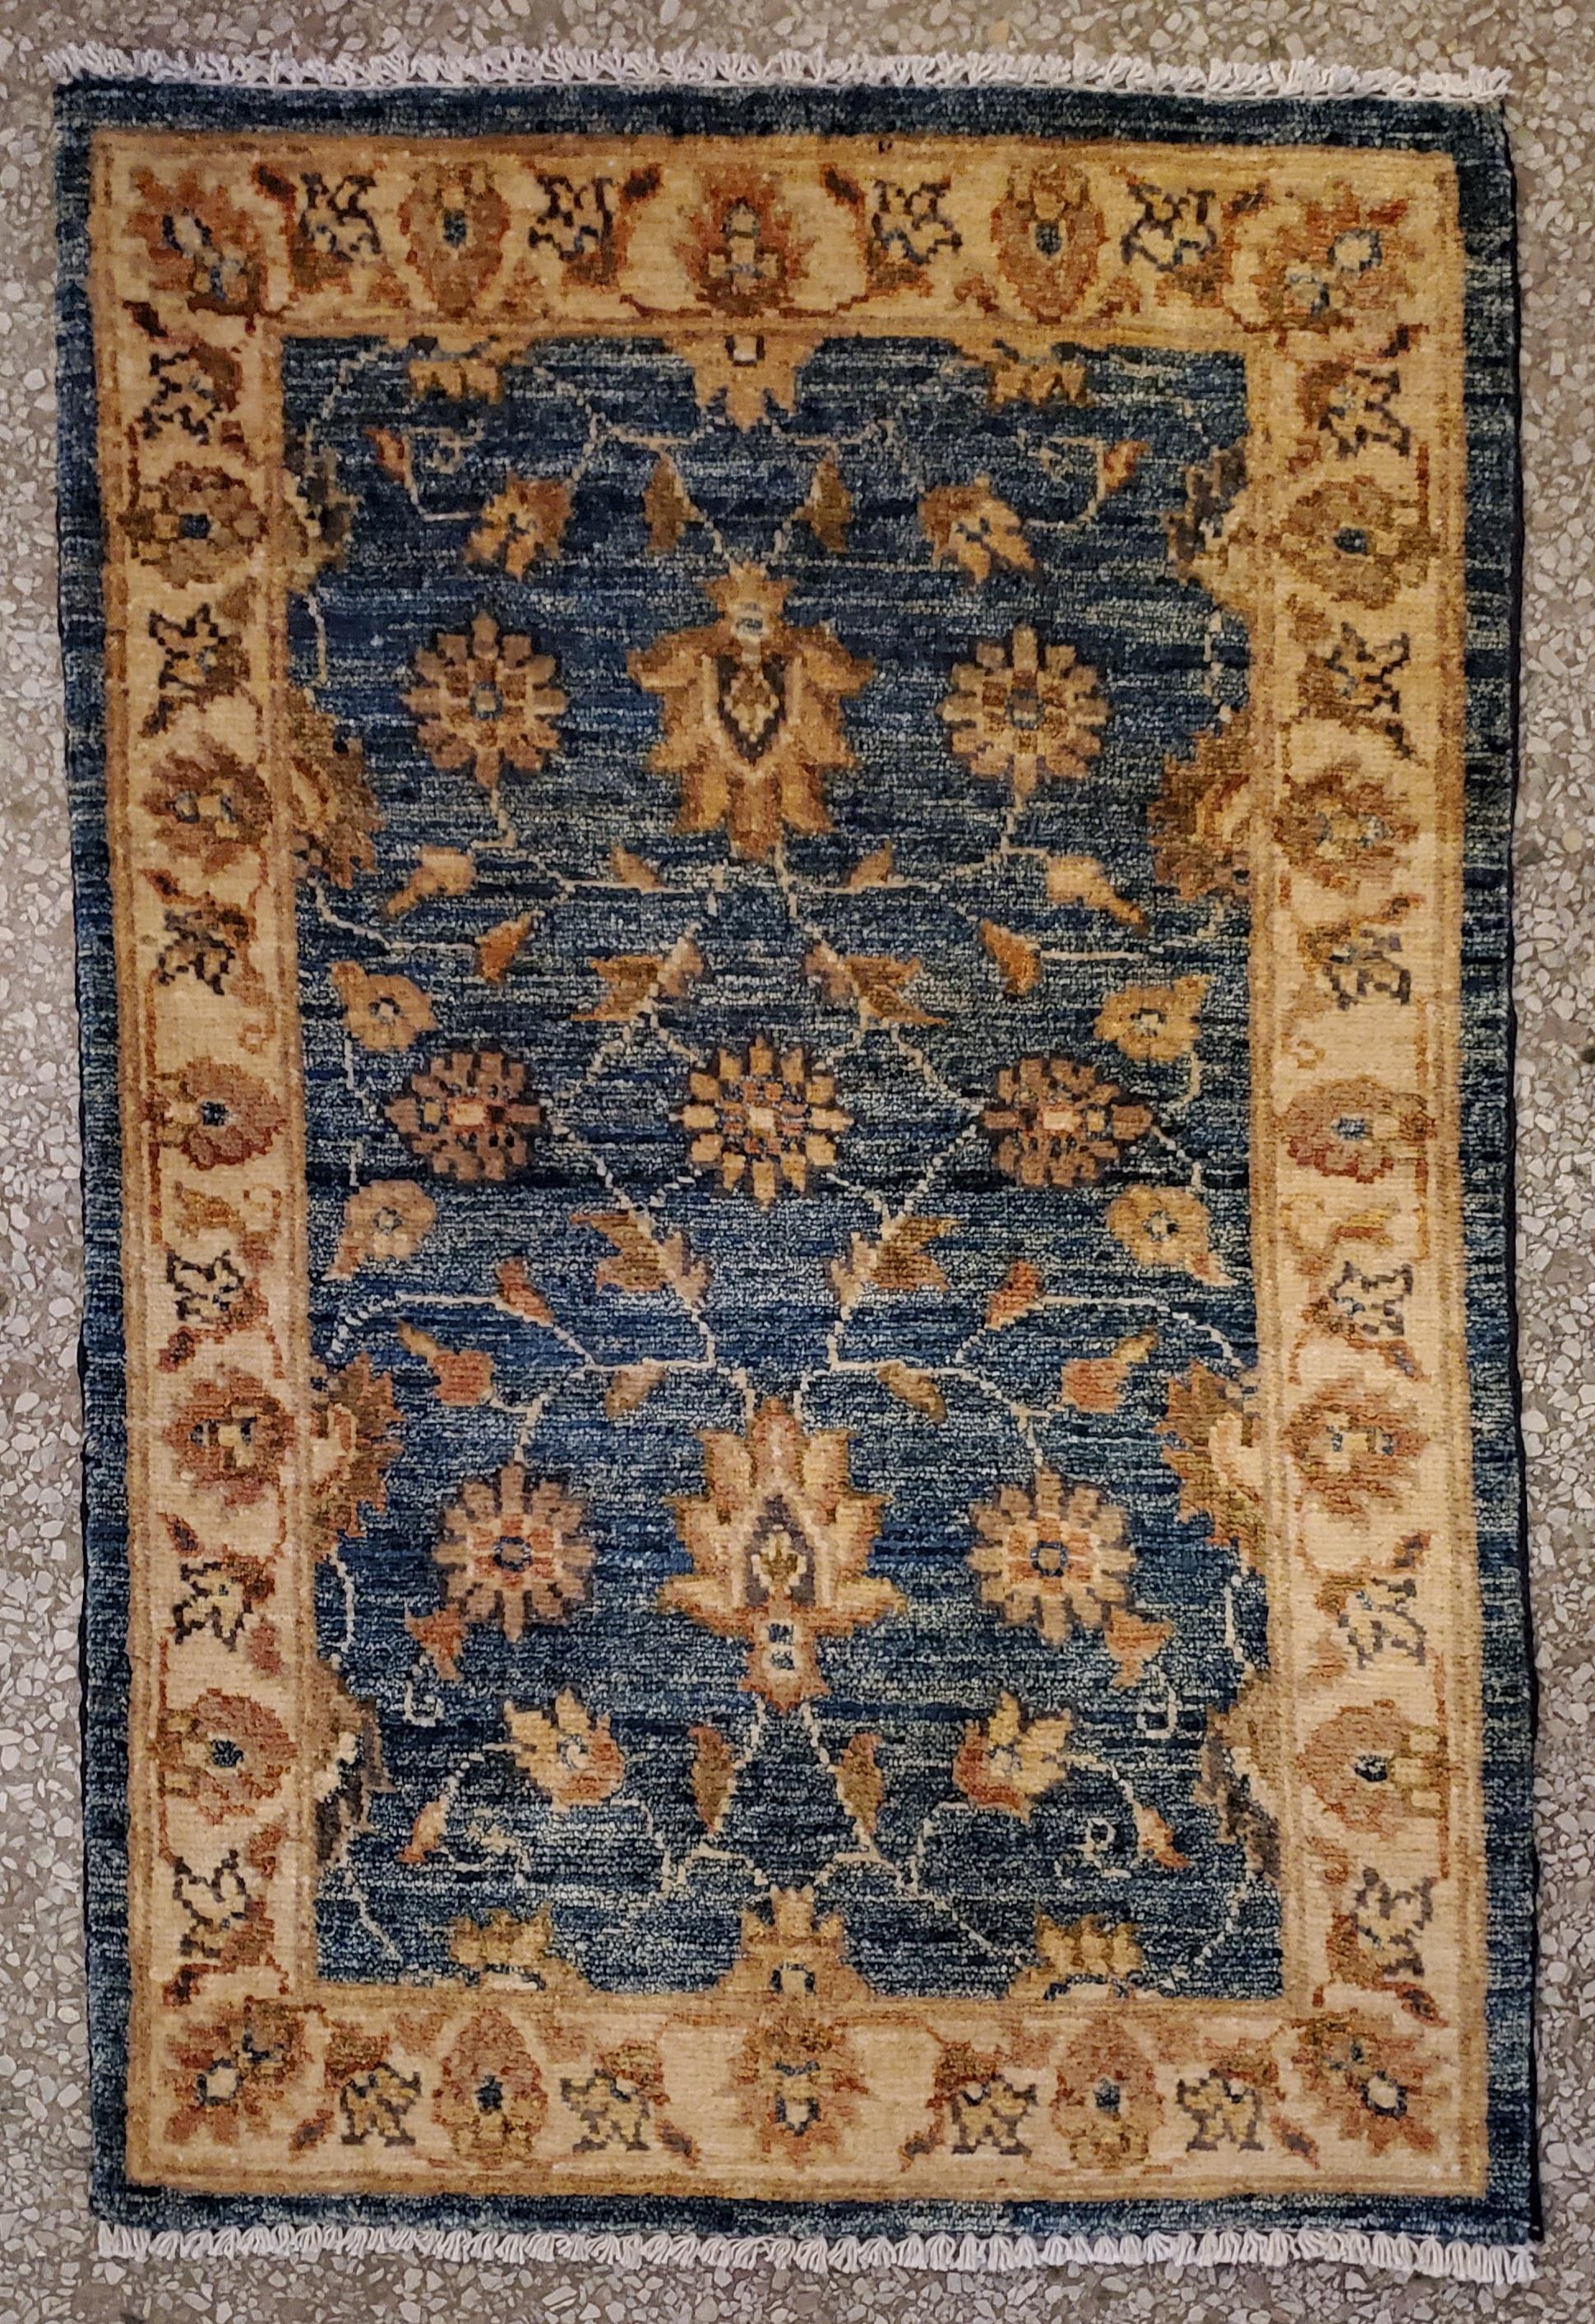 Medium Size Asian Area Rug, Colorful / 215 In New Condition For Sale In Orlando, FL